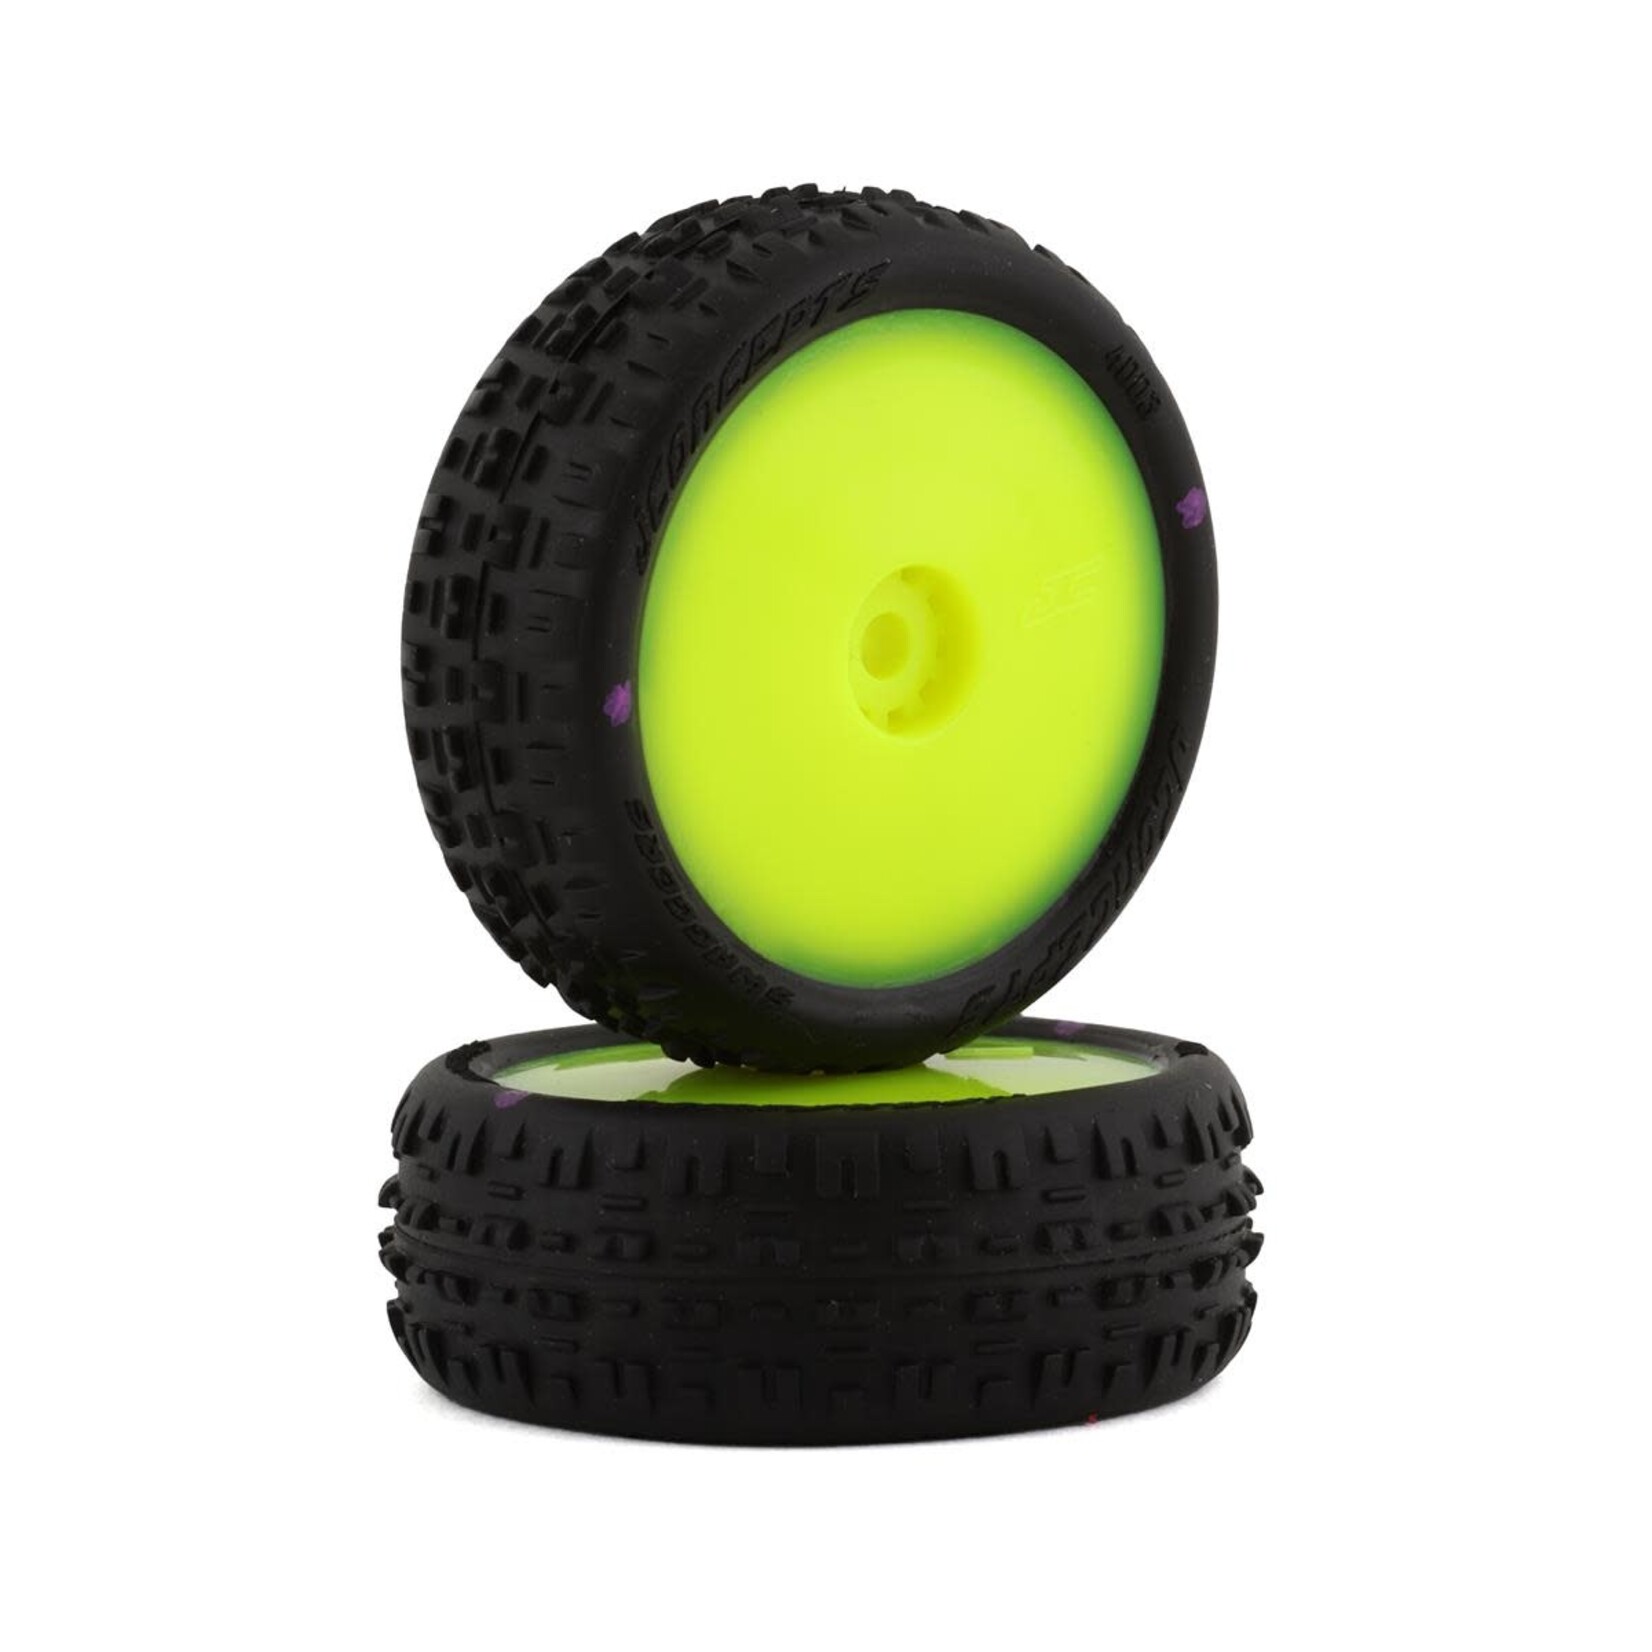 JConcepts JConcepts Mini-B Swagger Pre-Mounted Front Tires (Yellow) (2) (Pink) #4003-201011